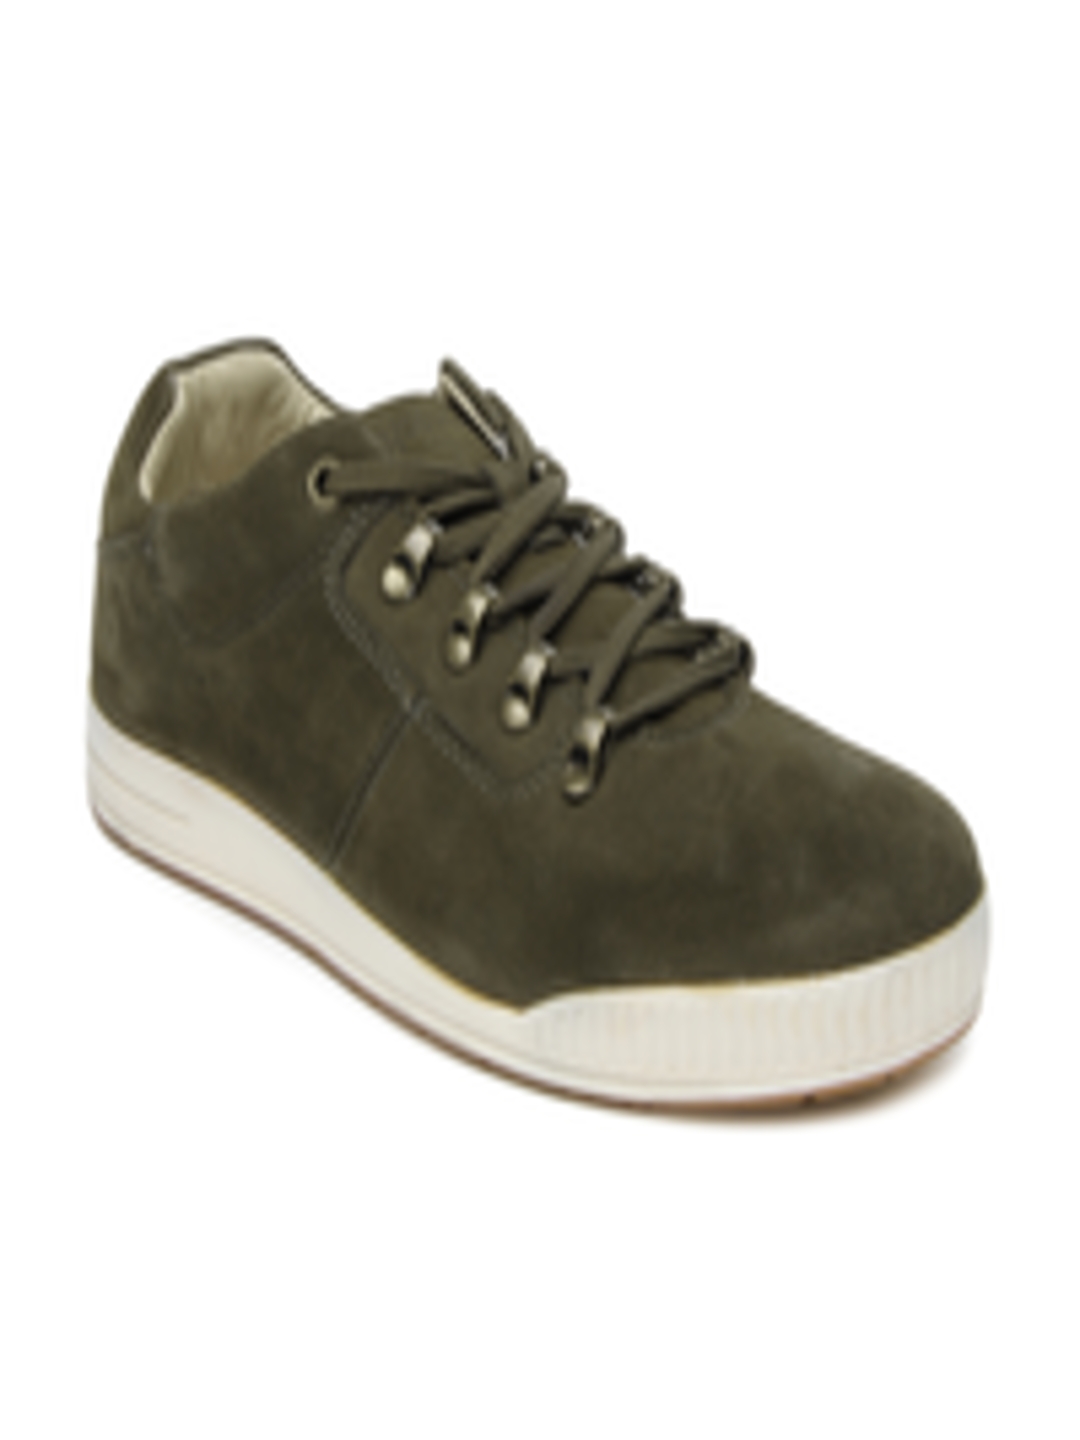 Buy Woodland Men Olive Green Suede Casual Shoes - Casual Shoes for Men ...